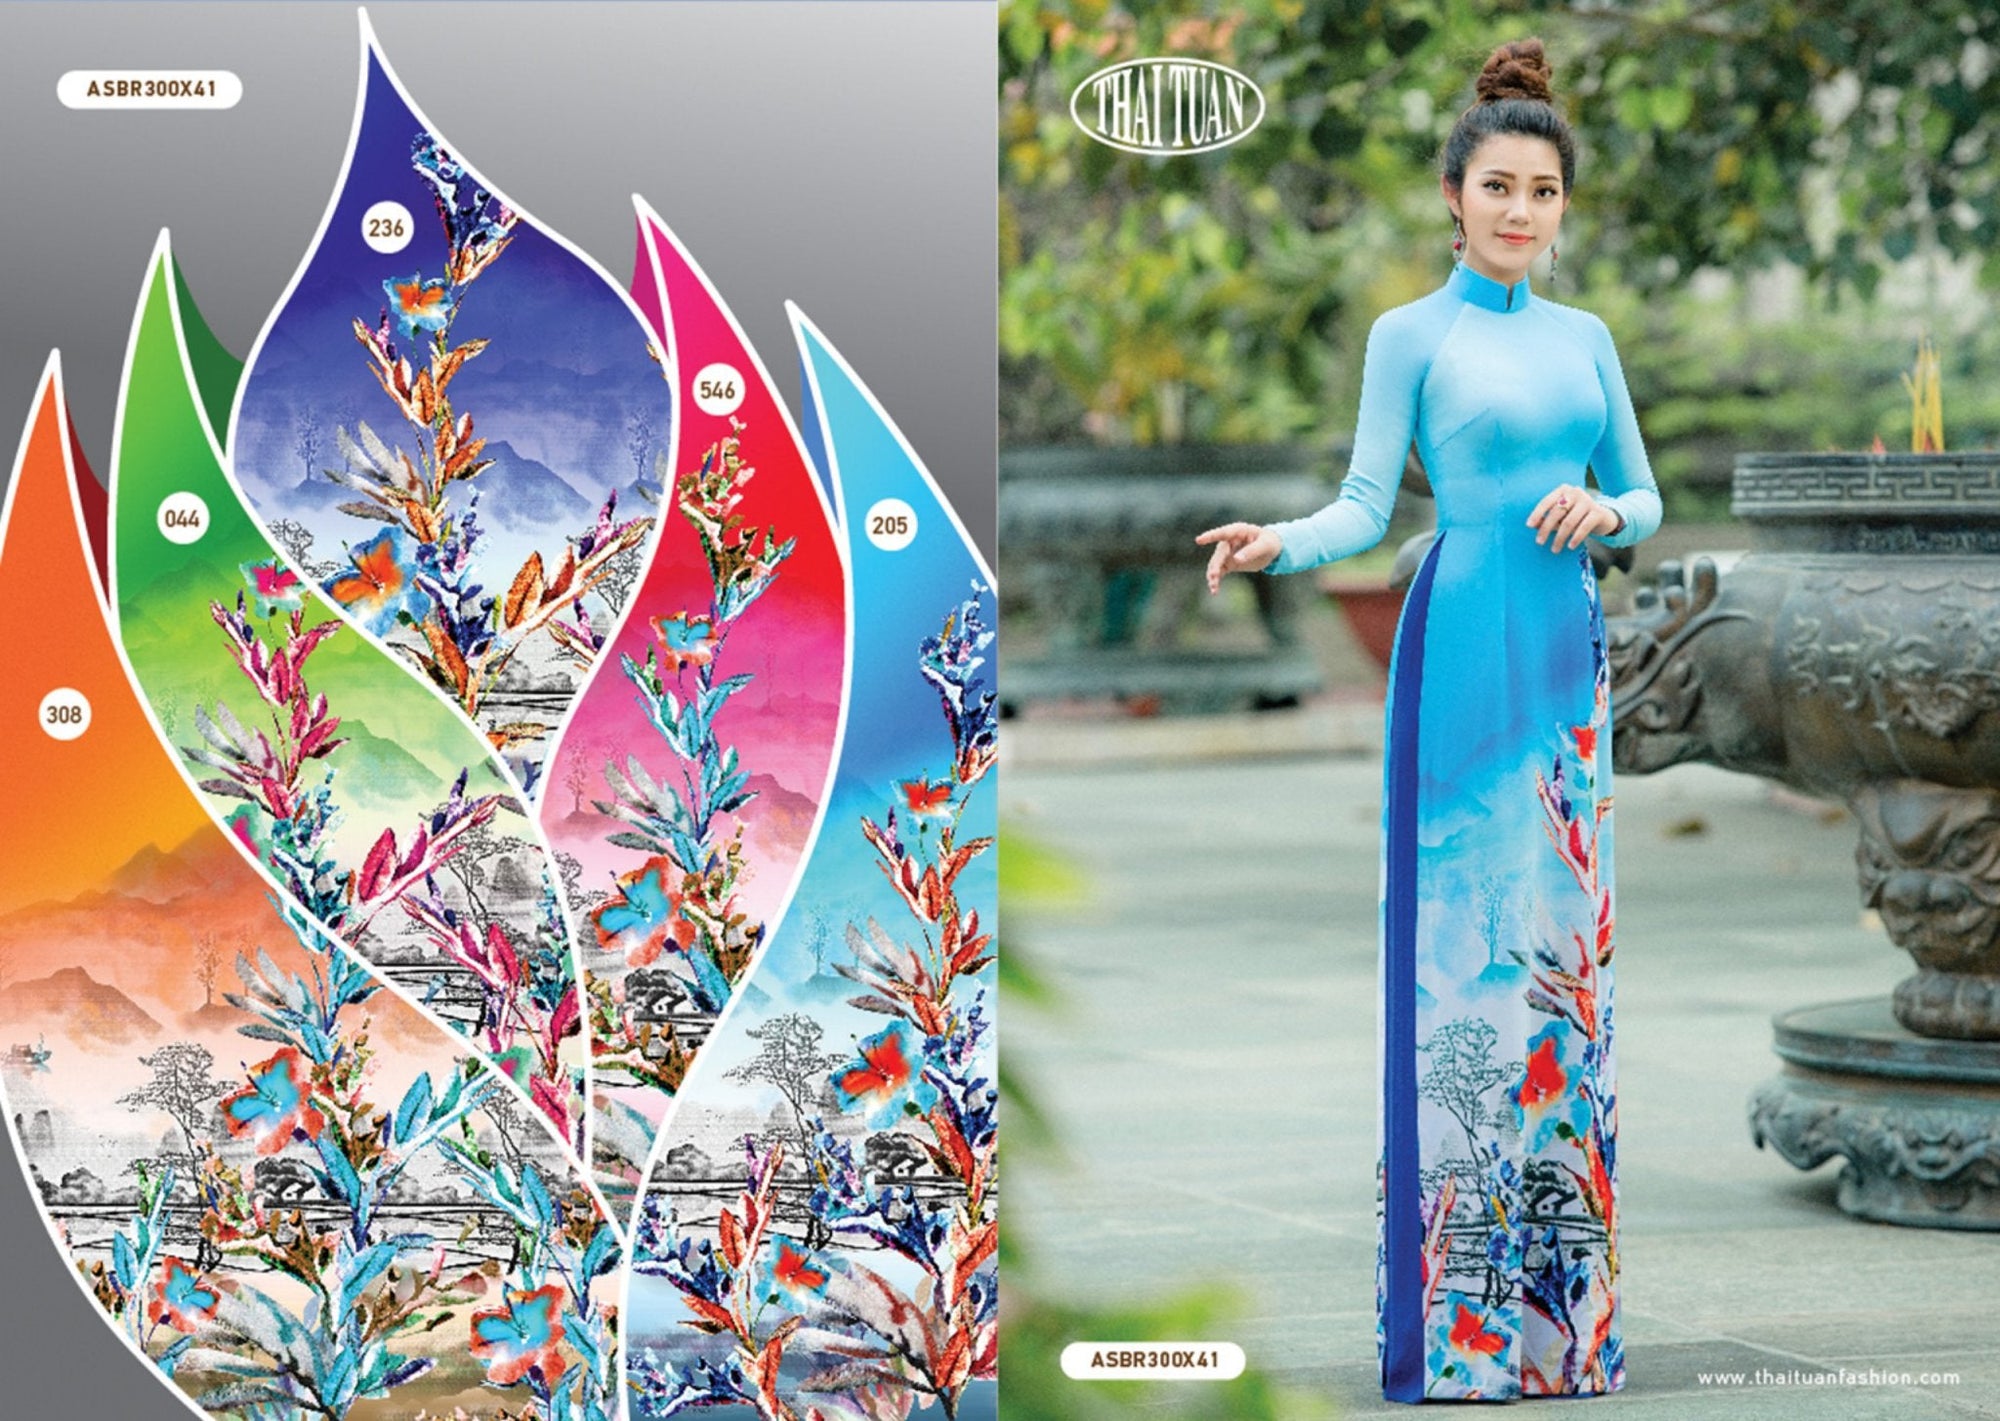 Made-to-measure ao dai by Mark&Vy using high quality, Thai Tuan fabric.